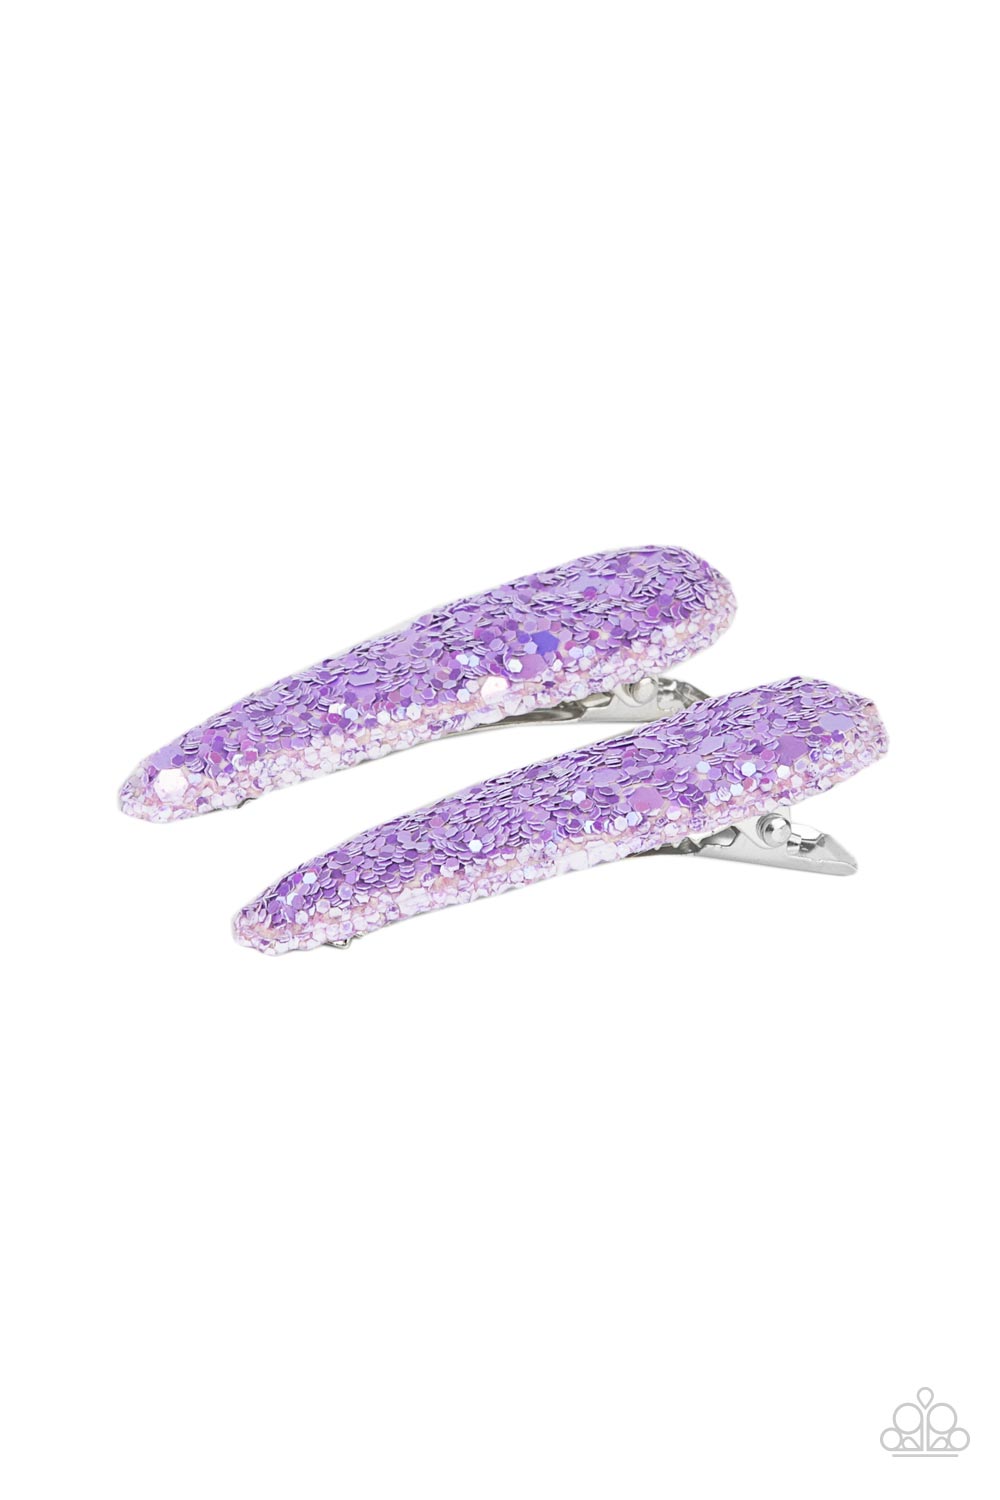 Sugar Plum Sparkle Purple Hair Clip - Paparazzi Accessories Item #P7SS-PRXX-124XX Dusted in dainty purple sparkles, a glittery pair of puffy hair clips pins back the hair for a fairytale finish. Features standard hair clips on the back.  Sold as one pair of hair clips.